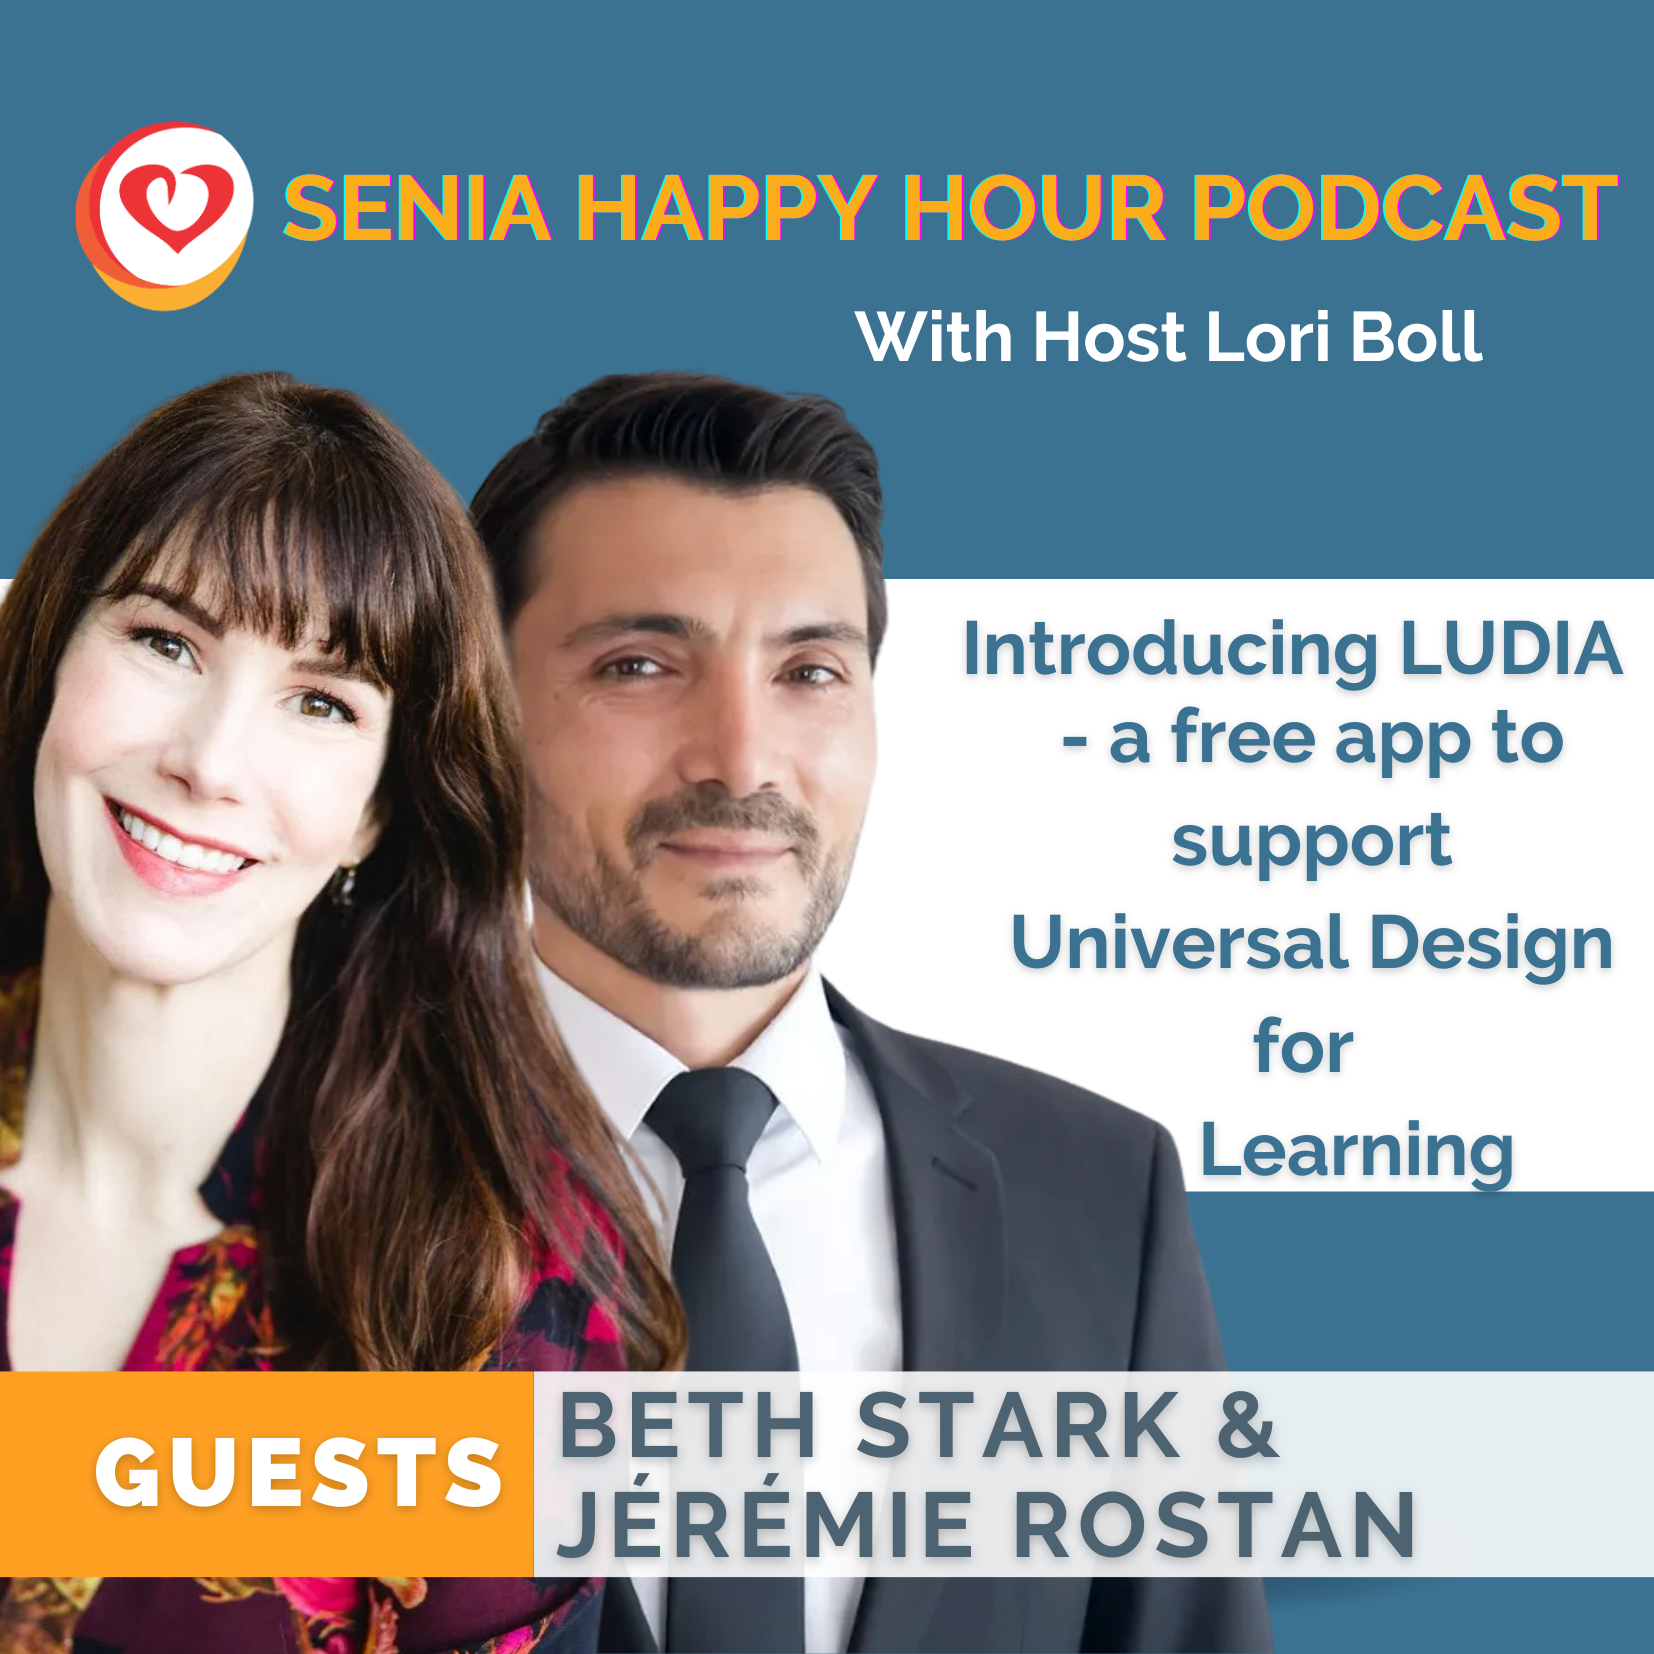 Poster for SENIA Happy Hour Podcast with Host Lori Boll. Title ''Introducing LUDIA'' Guests Beth Stark and Jeremie Rostan with an image of the guests